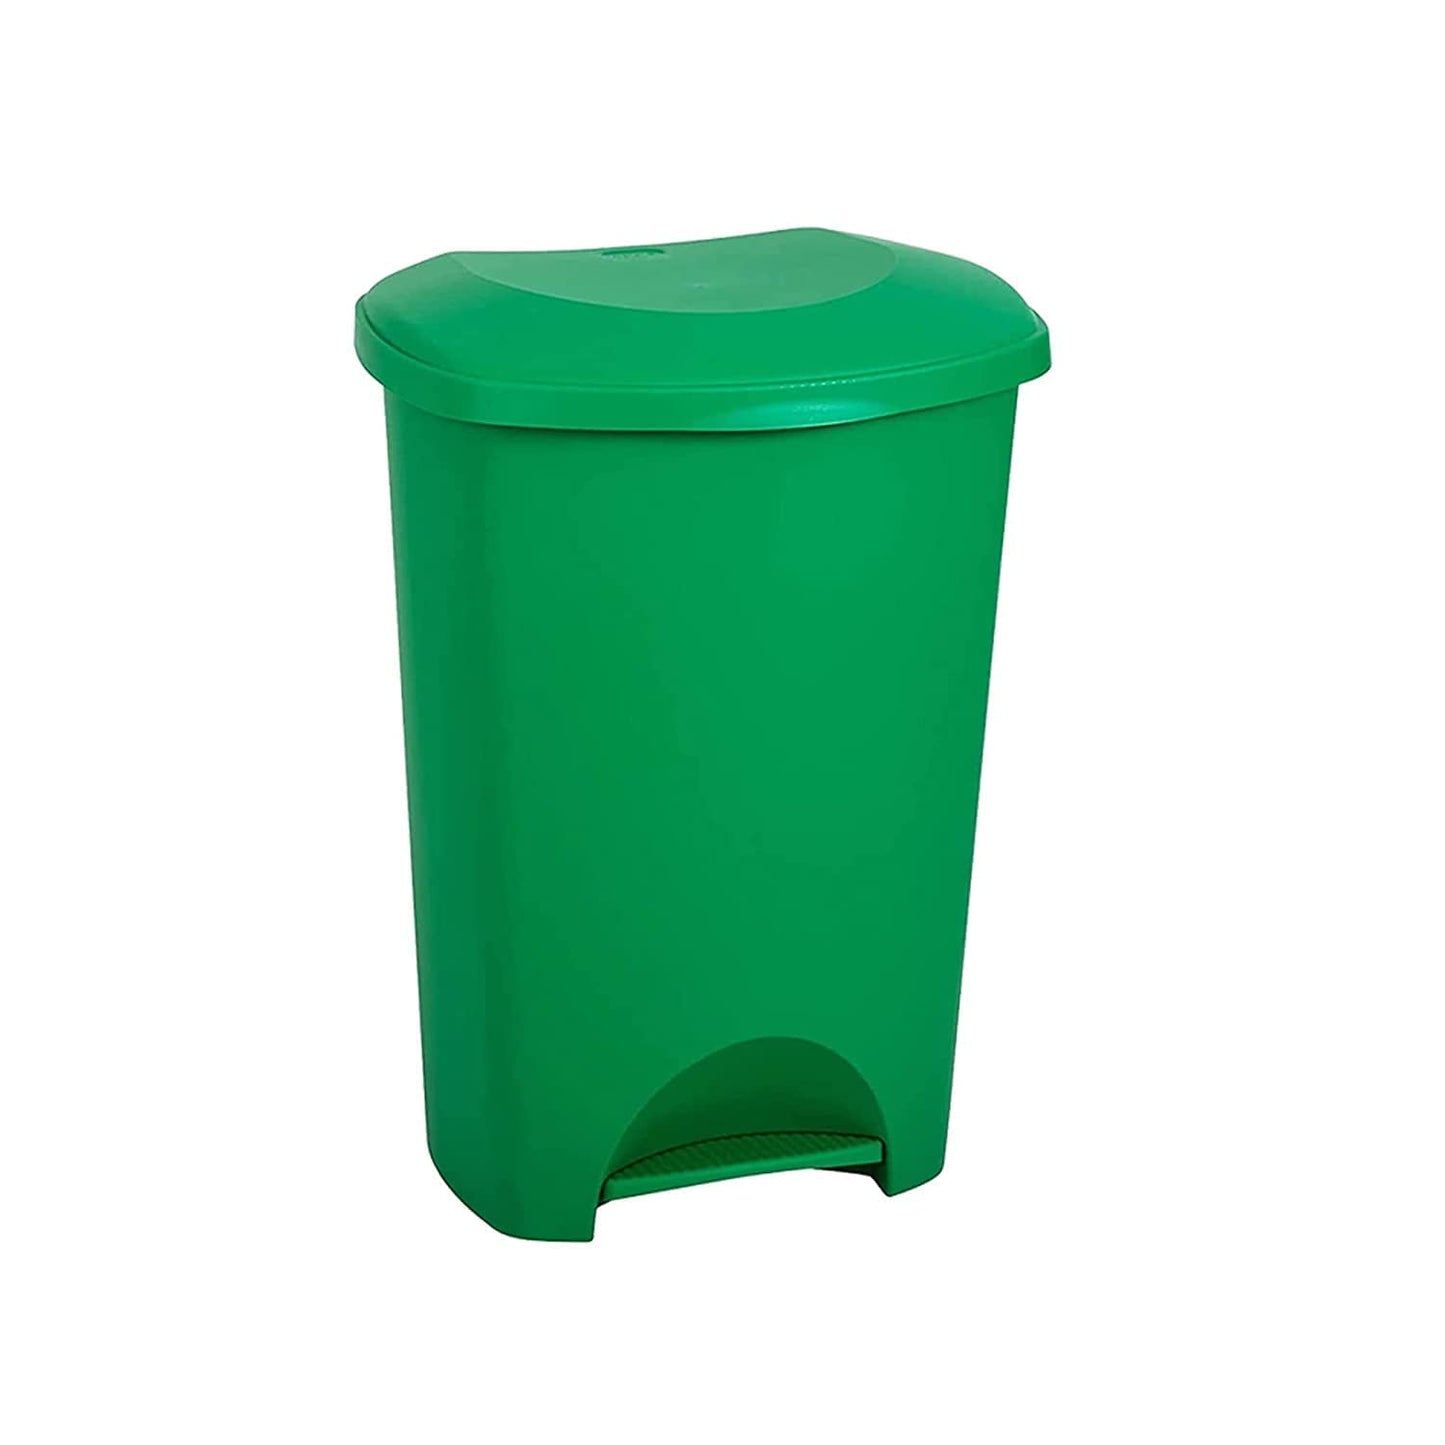 50 Litre Strong Plastic Hard Wearing Coloured Recycling Bins Complete With Lids